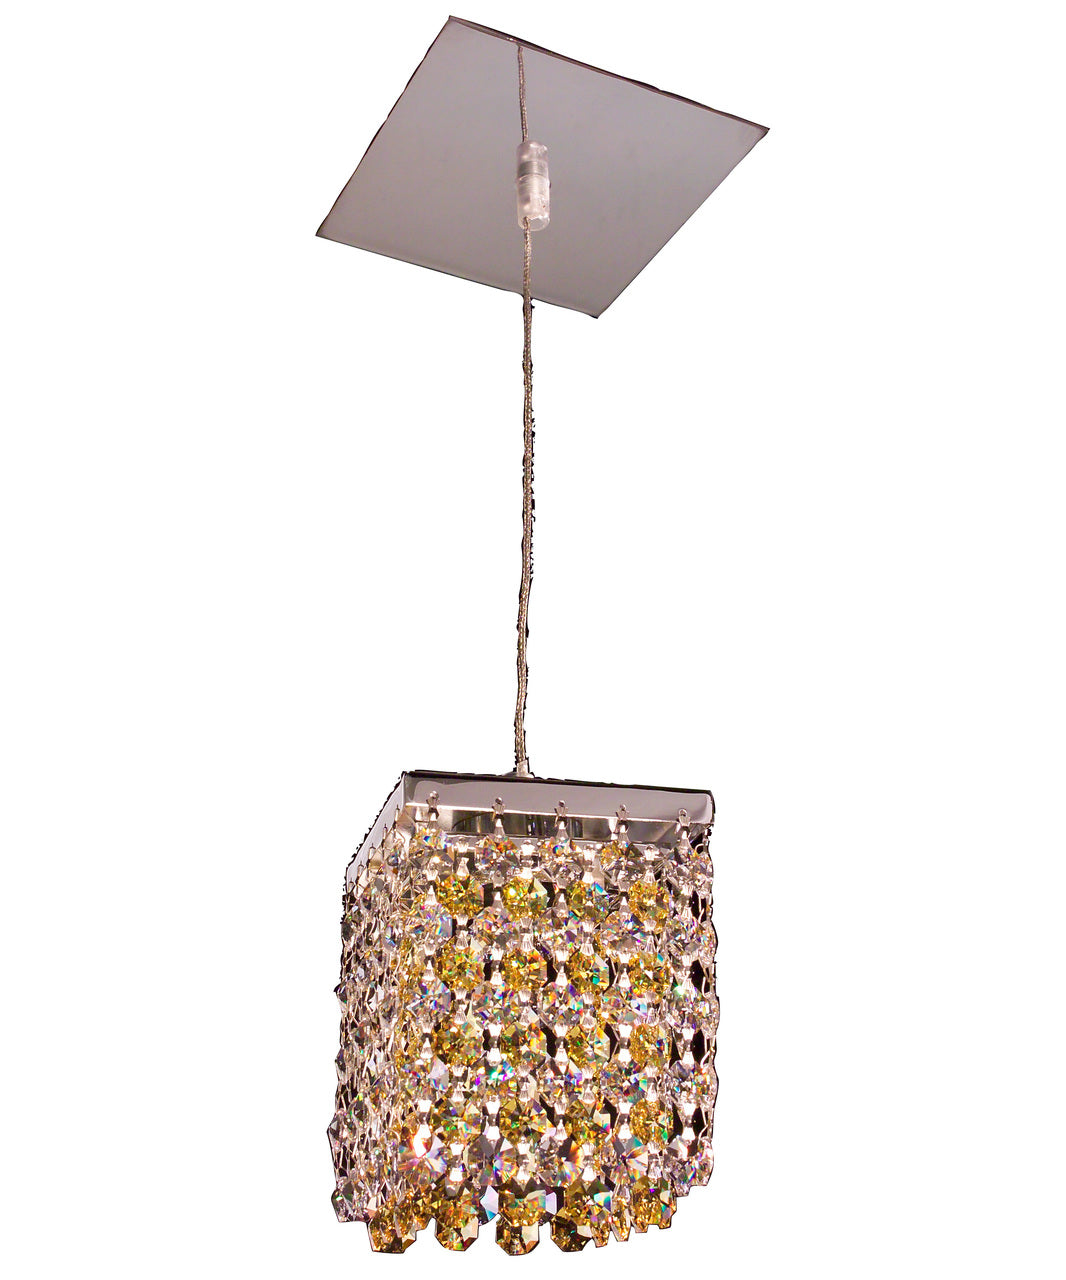 Classic Lighting 16101 SSQ Bedazzle Crystal Pendant in Chrome